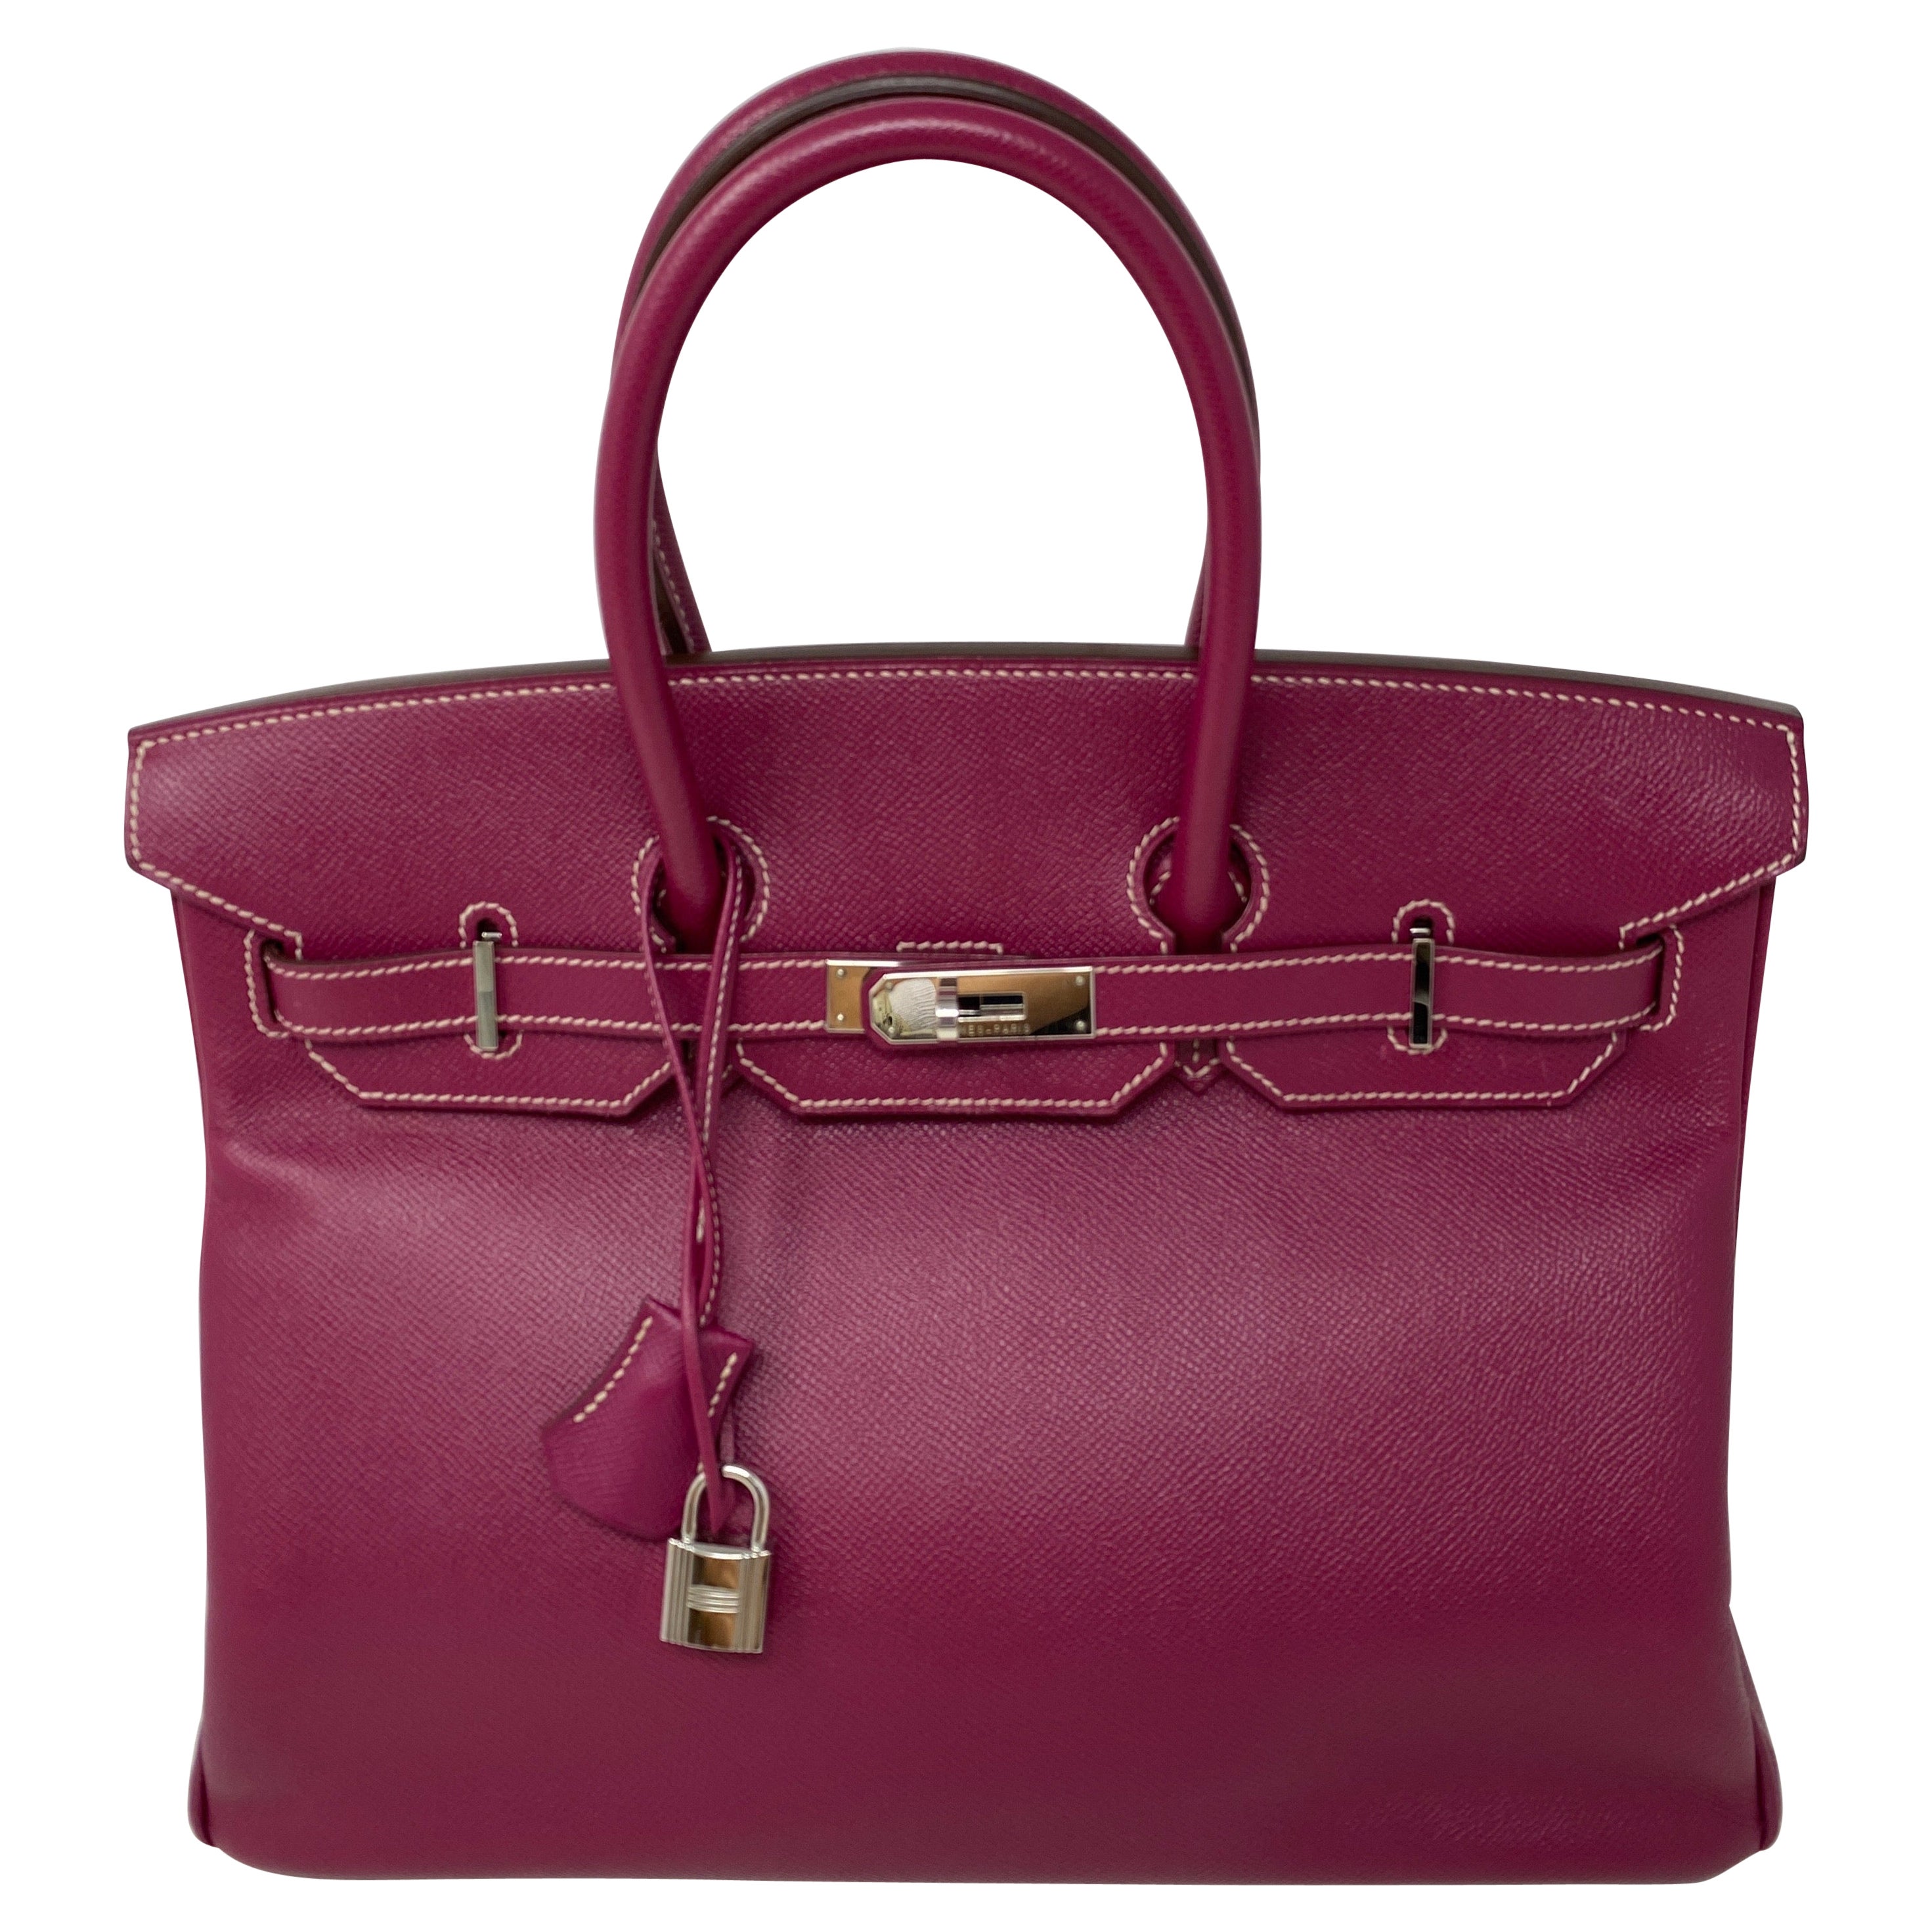 Hermes Birkin 35 Tosca/ Rose Tyrien Candy Collection Bag